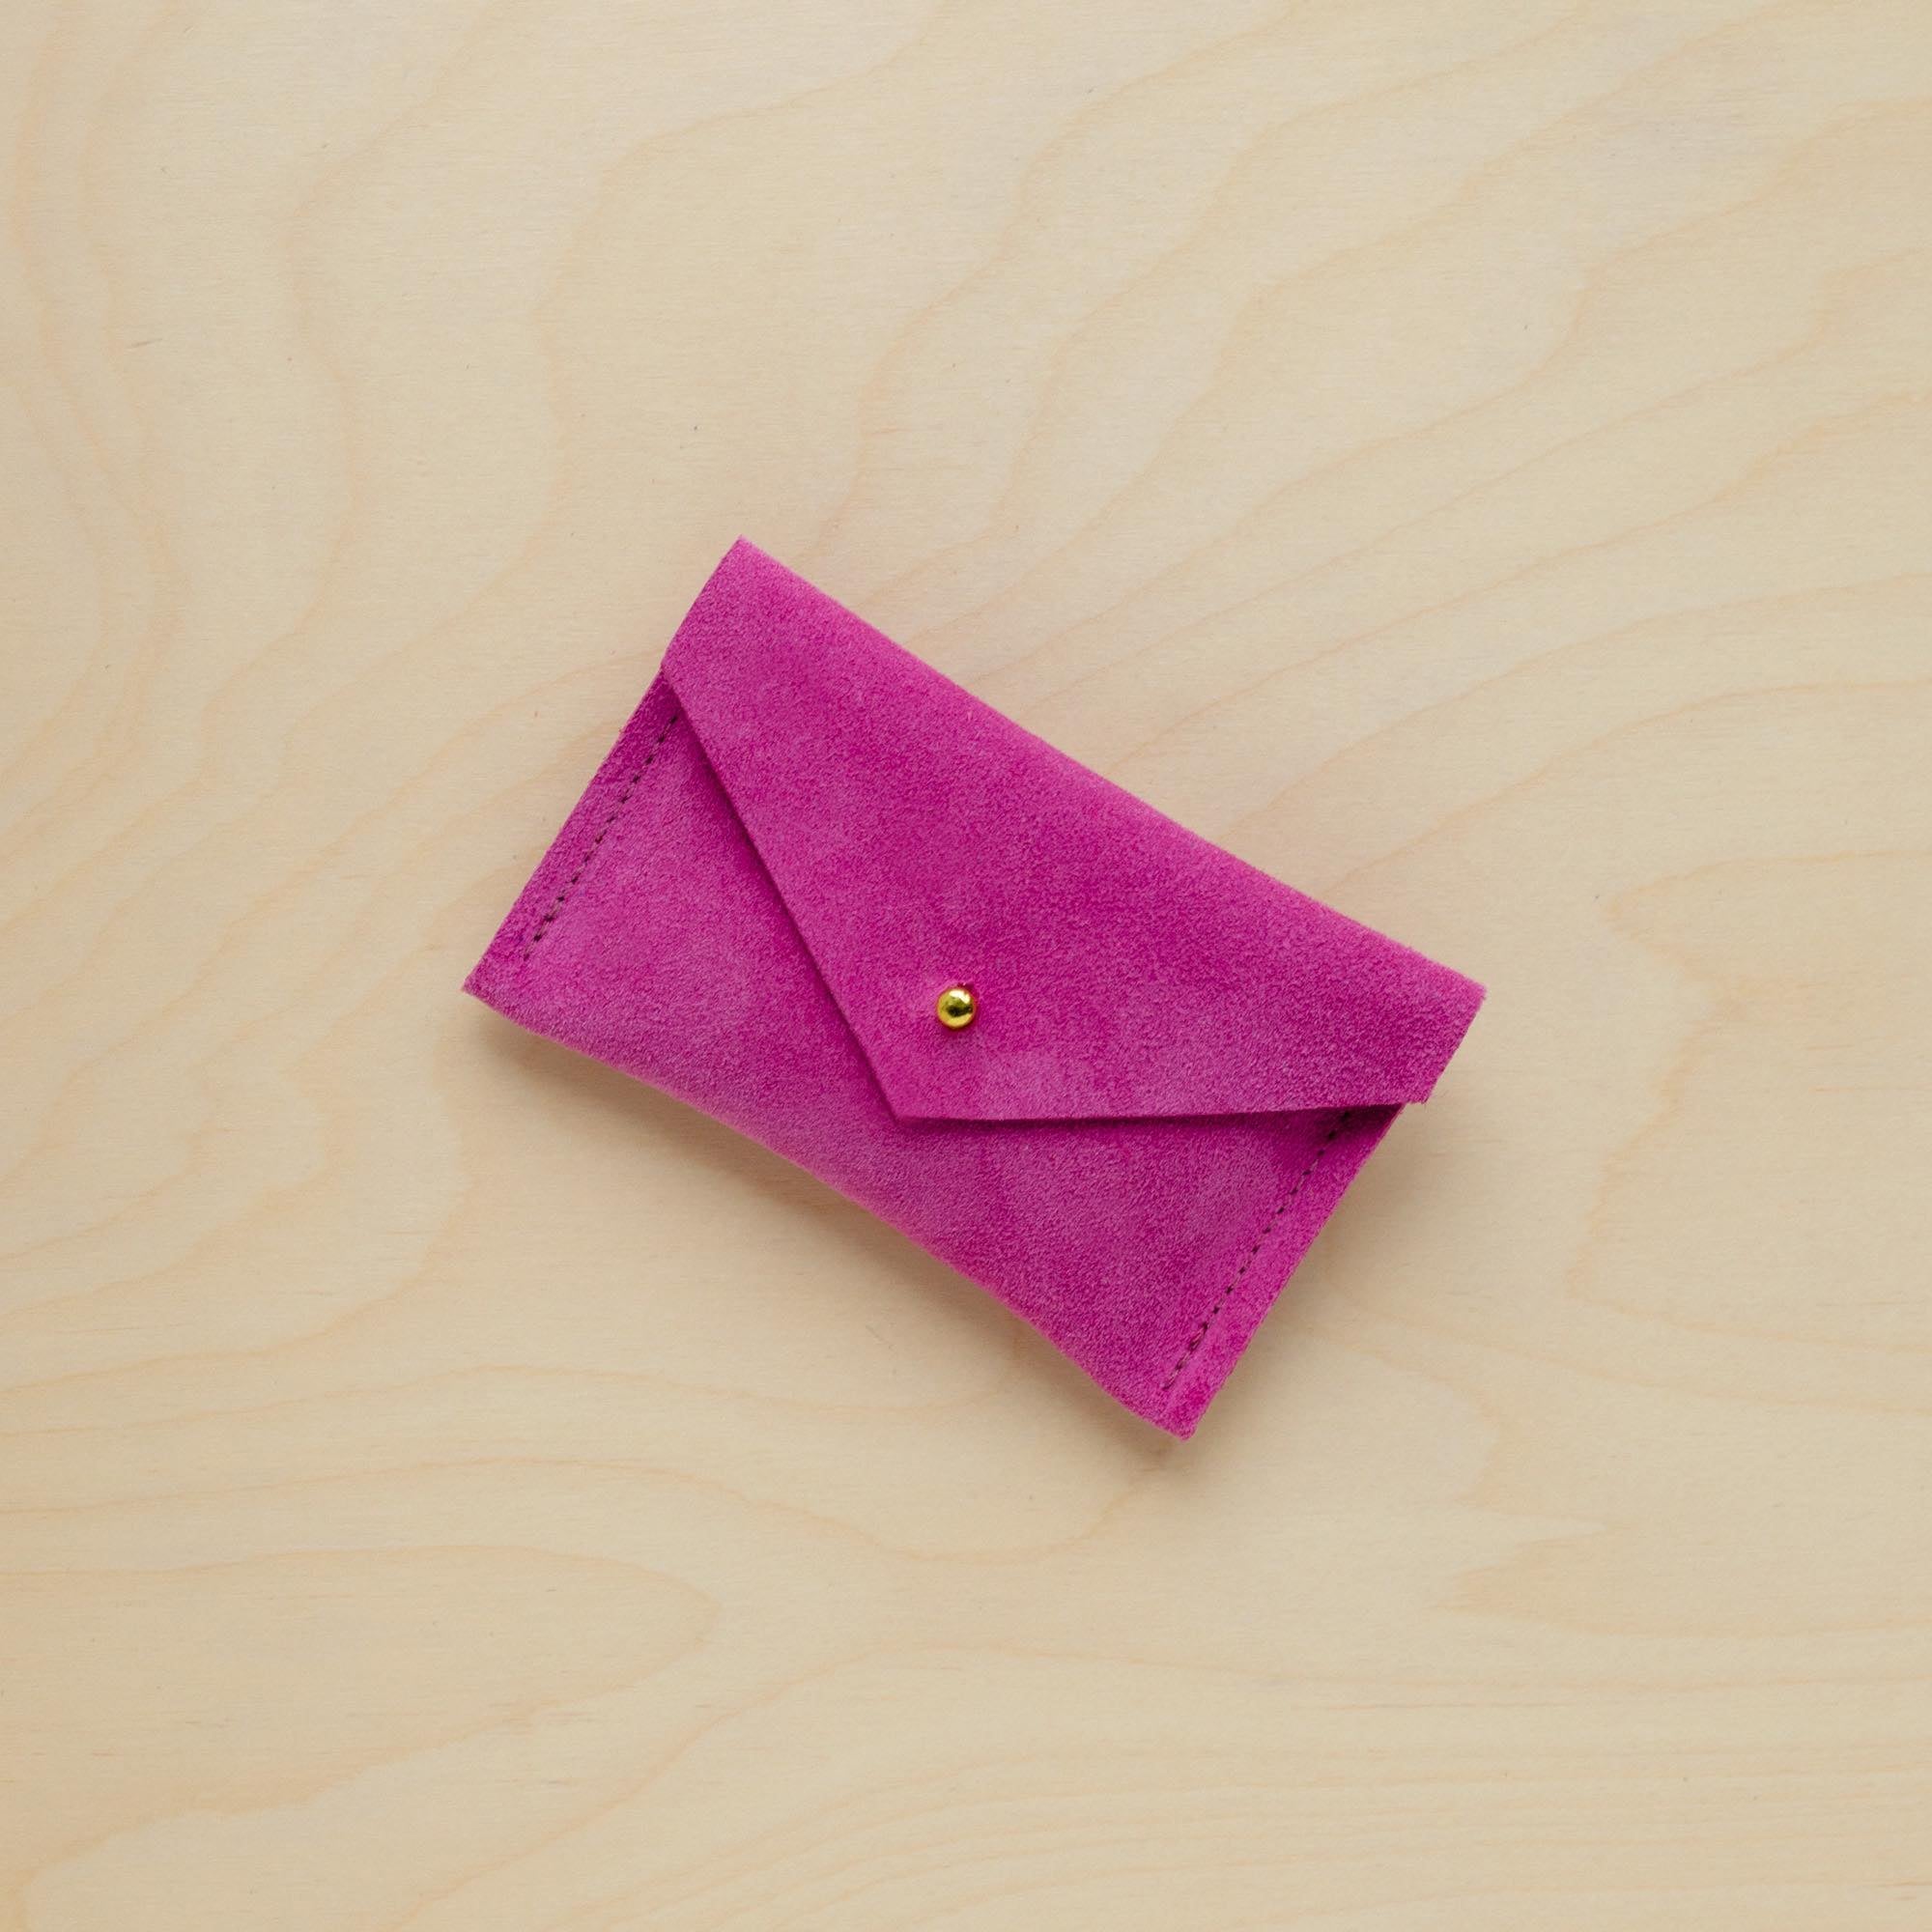 A suede Small Notions Pouch in Fuchsia Pink. Complete with a stud for secure closing.